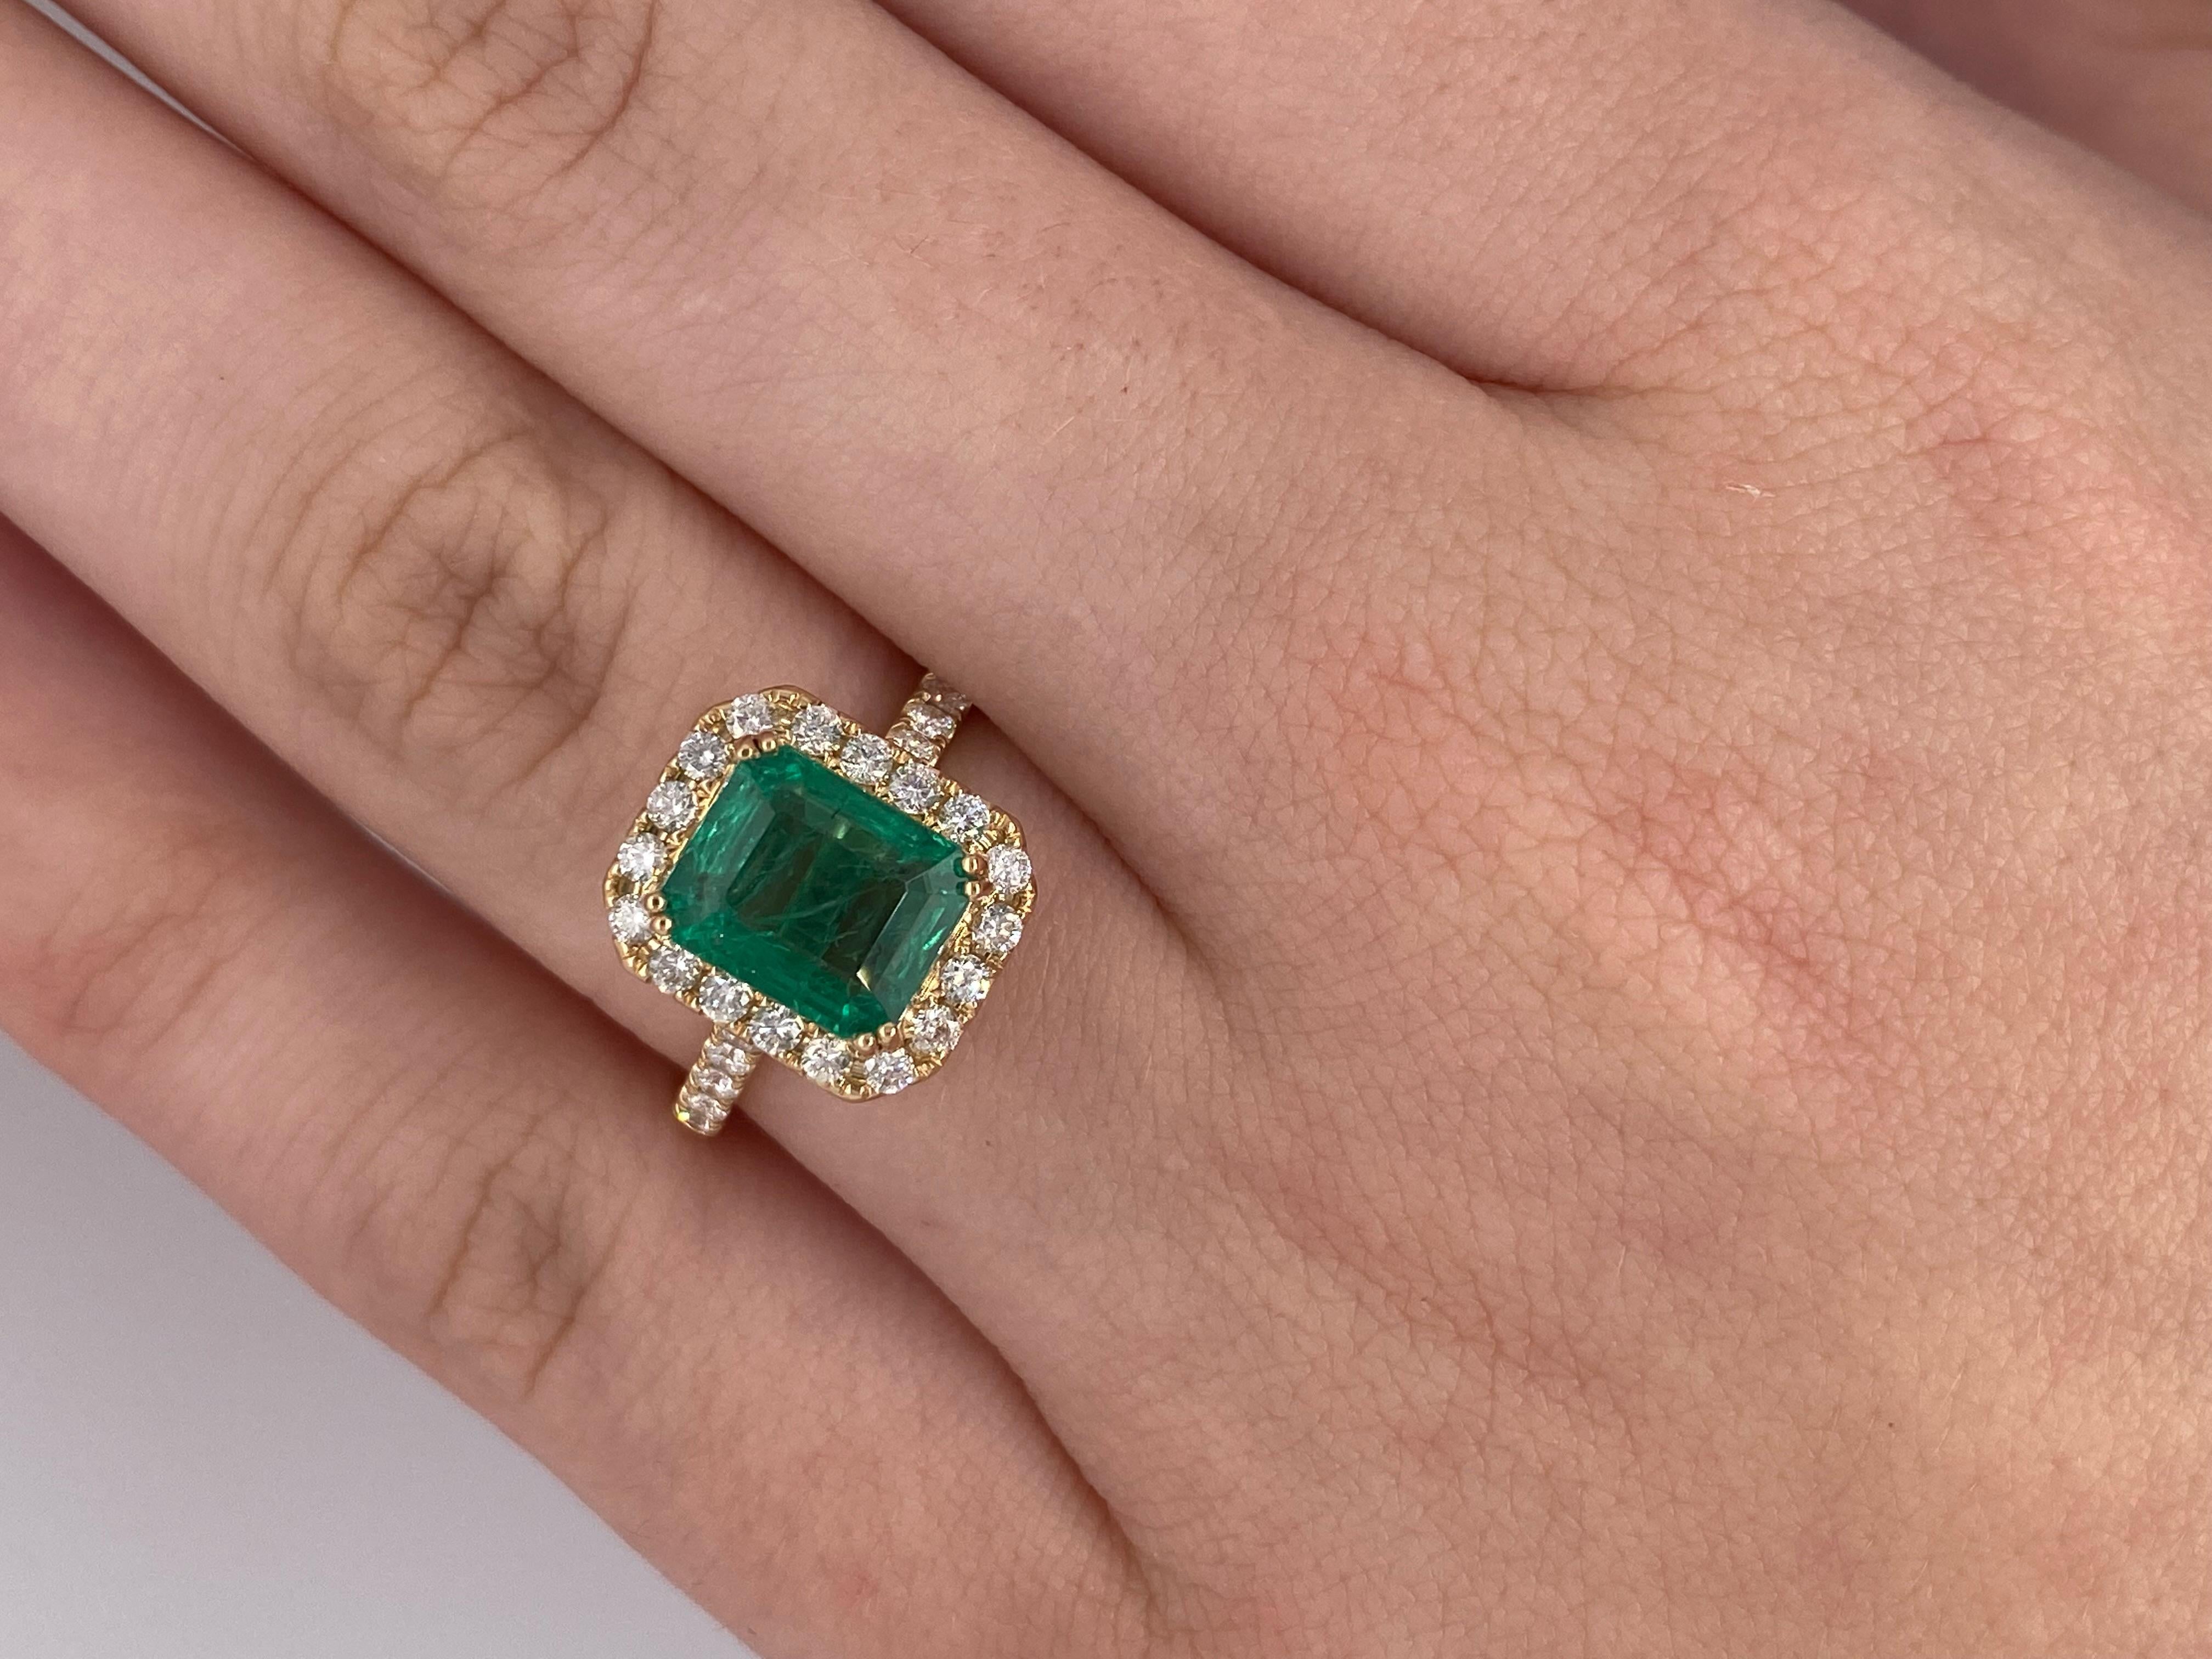 Classic halo ring great for an alternative stone engagement ring or a right hand fashion ring.
This beautiful saturated vivid green Zambian emerald weighs 2.49 carat and surrounded by 0.54 carat total white vs diamonds is set in 18k yellow gold.
